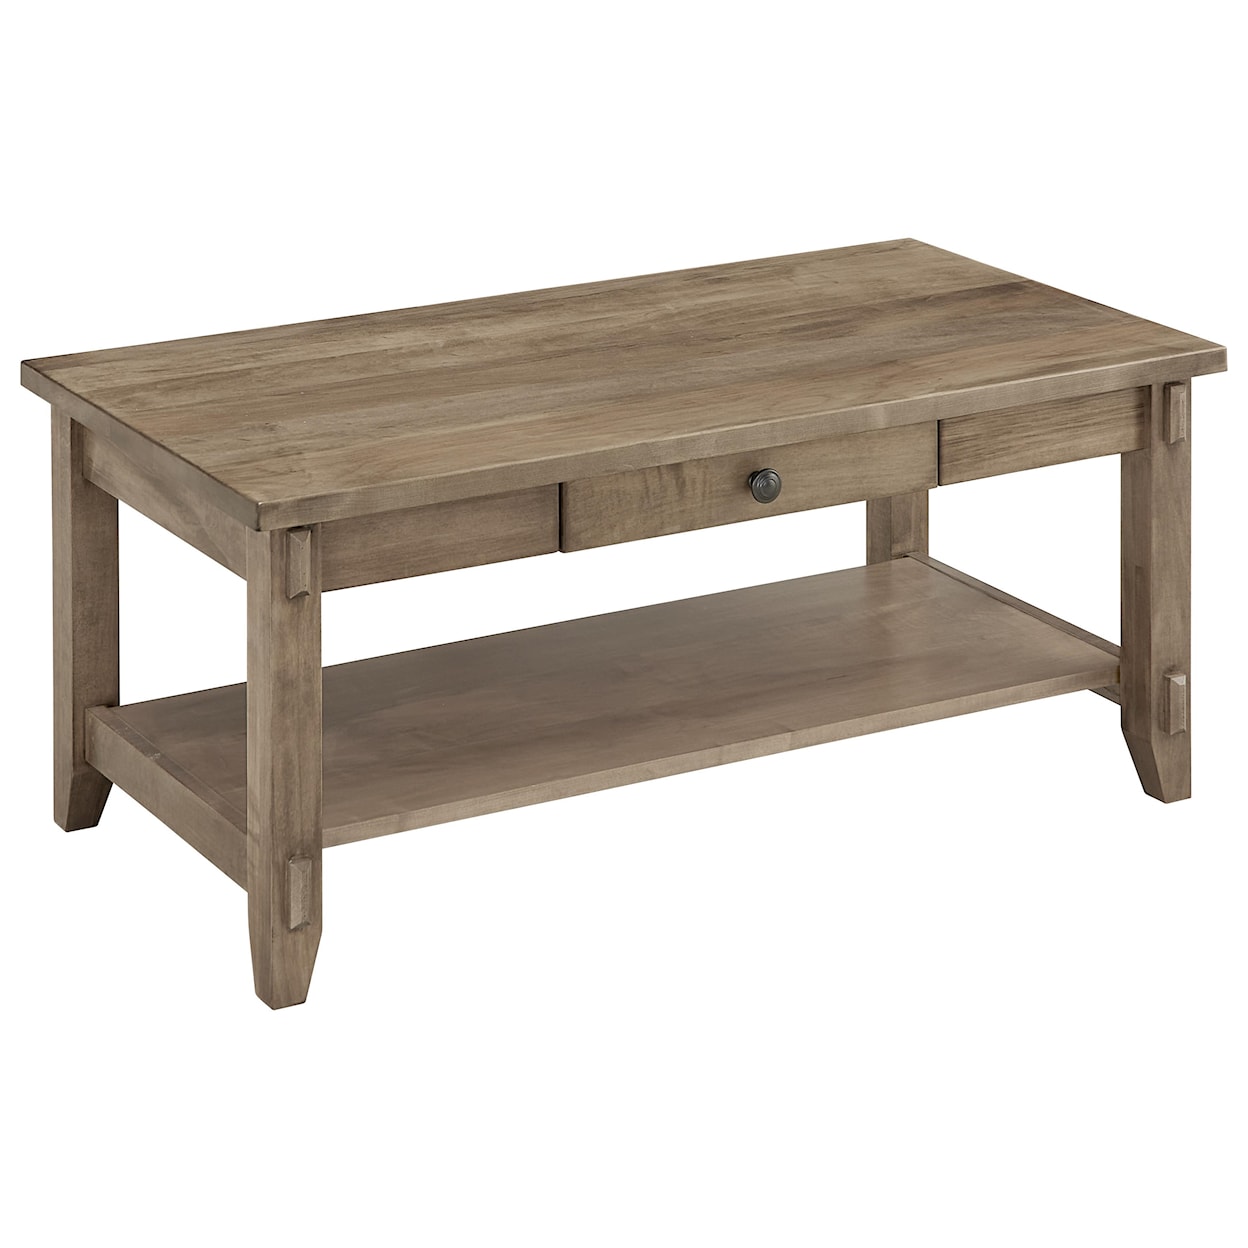 Archbold Furniture Amish Essentials Living Cocktail Table